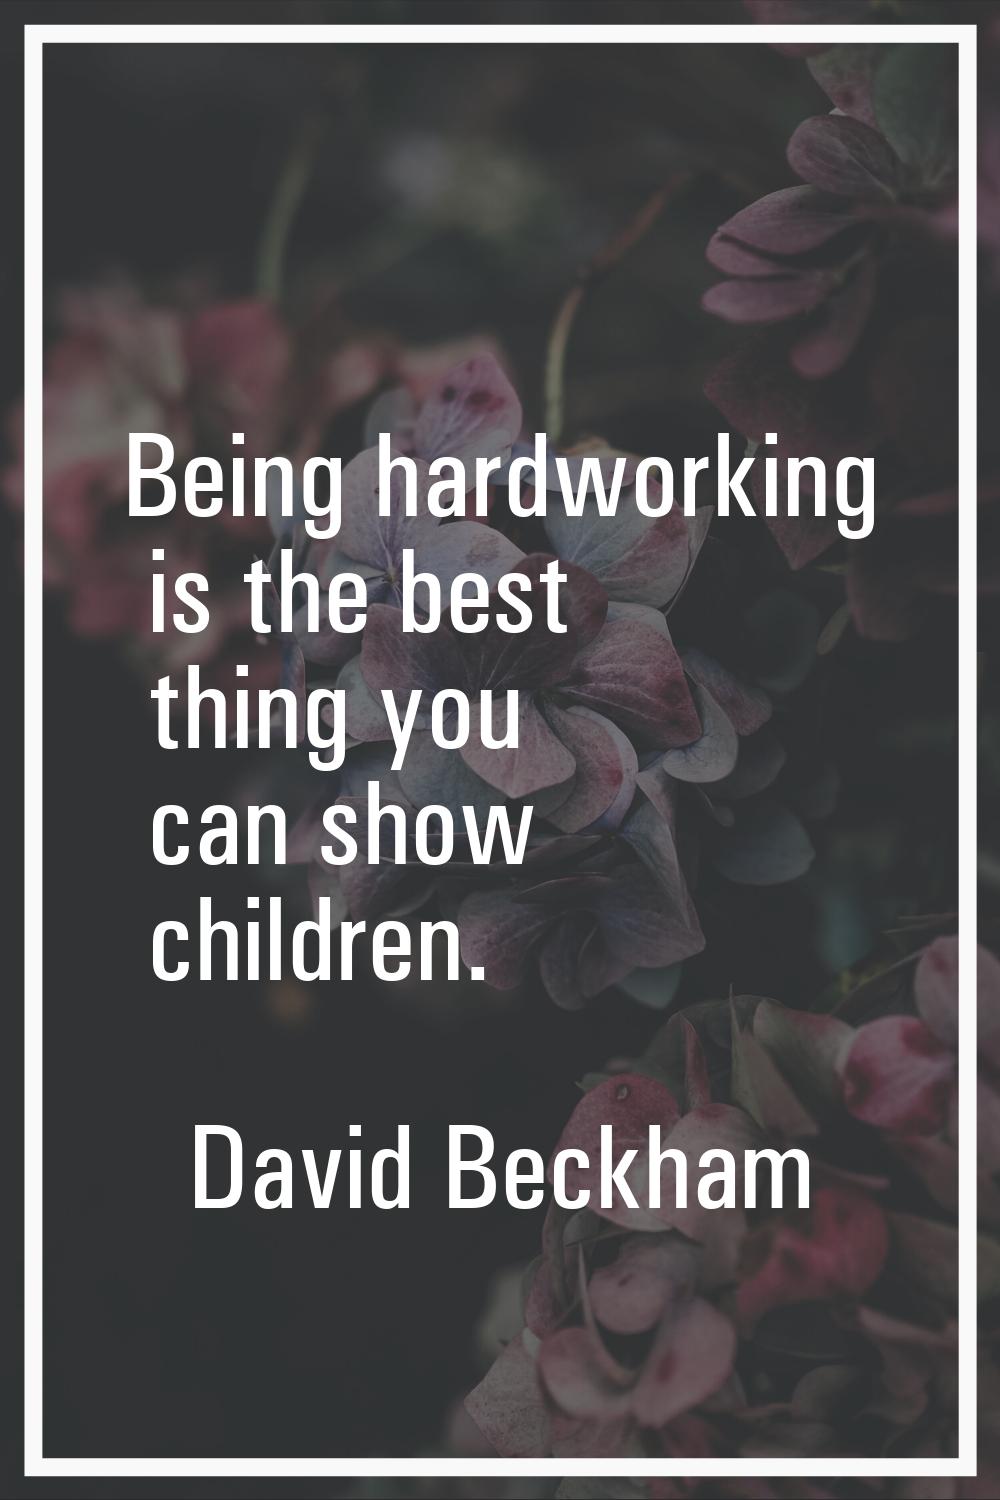 Being hardworking is the best thing you can show children.